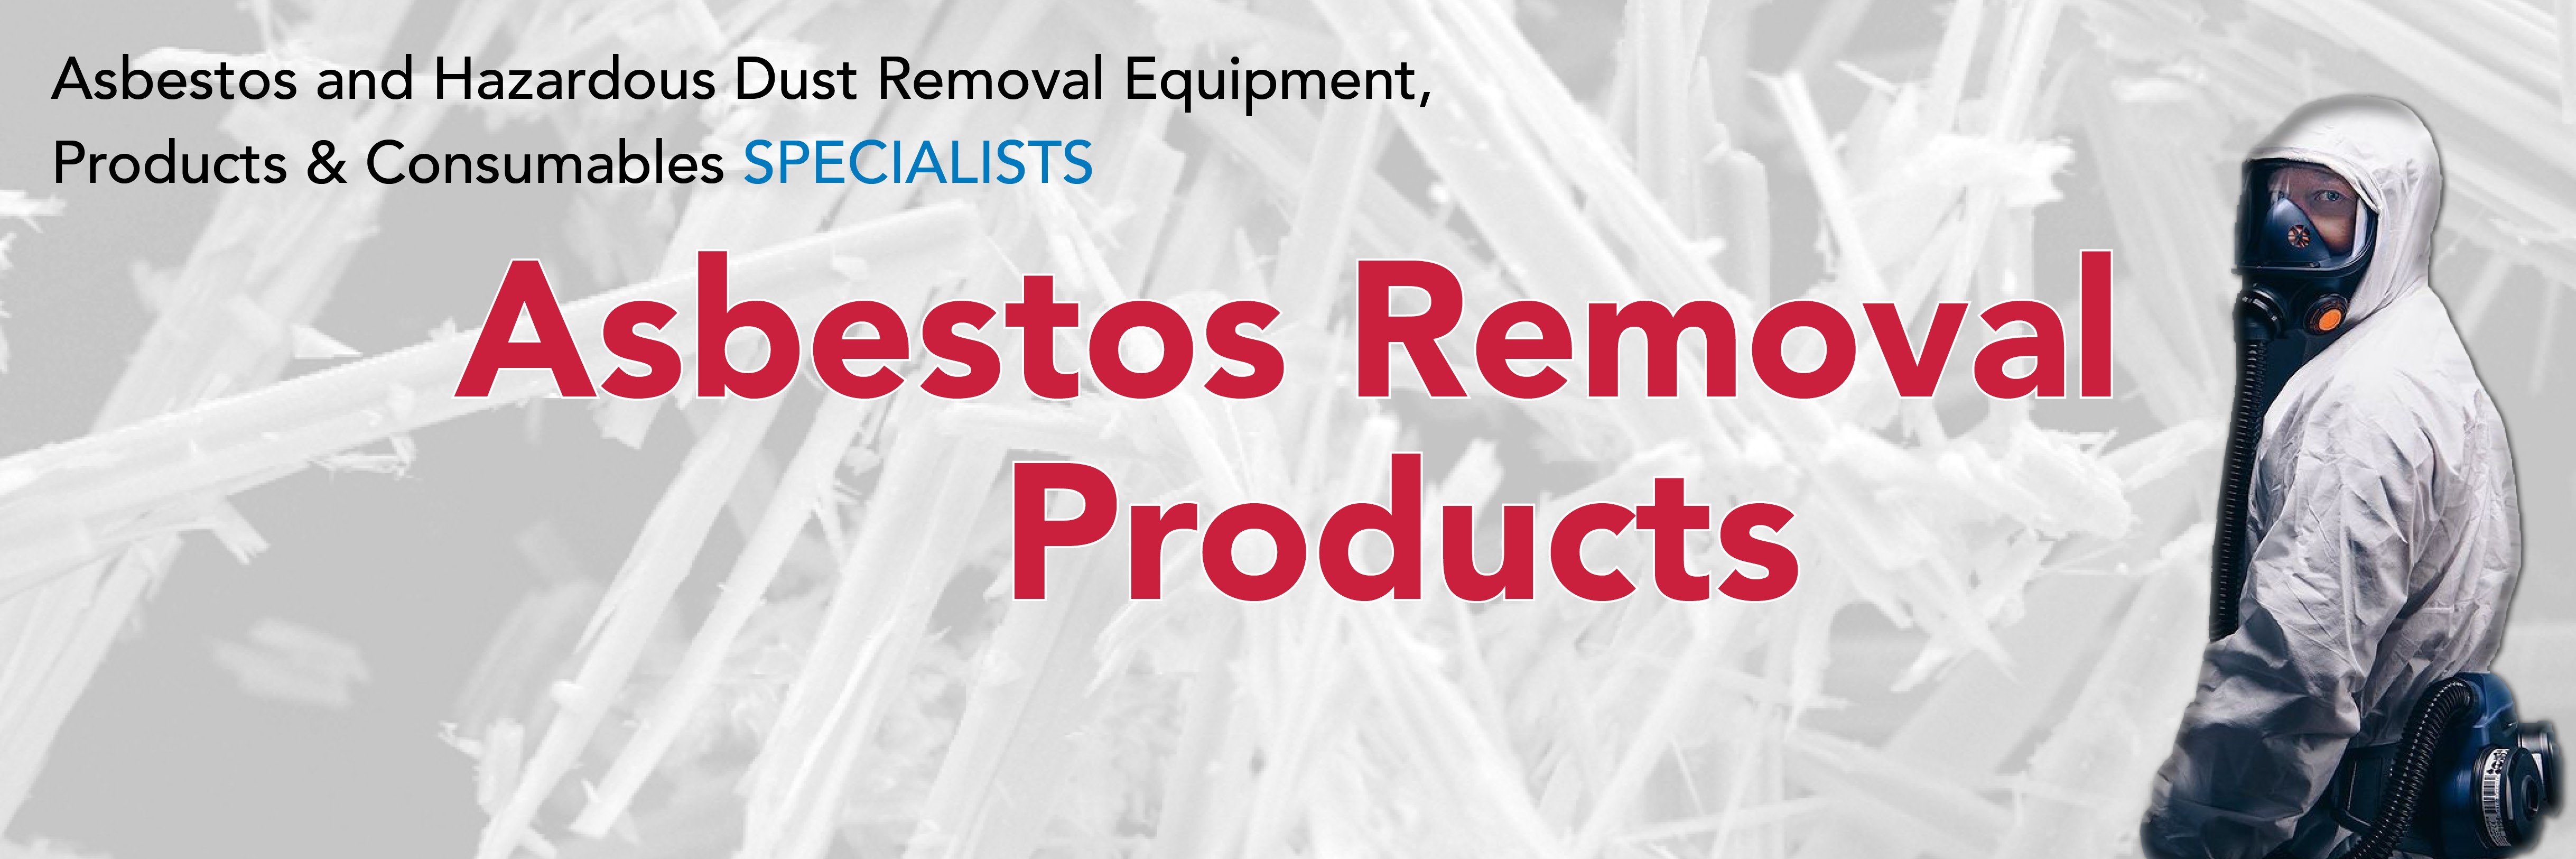 Asbestos Removal Products Home